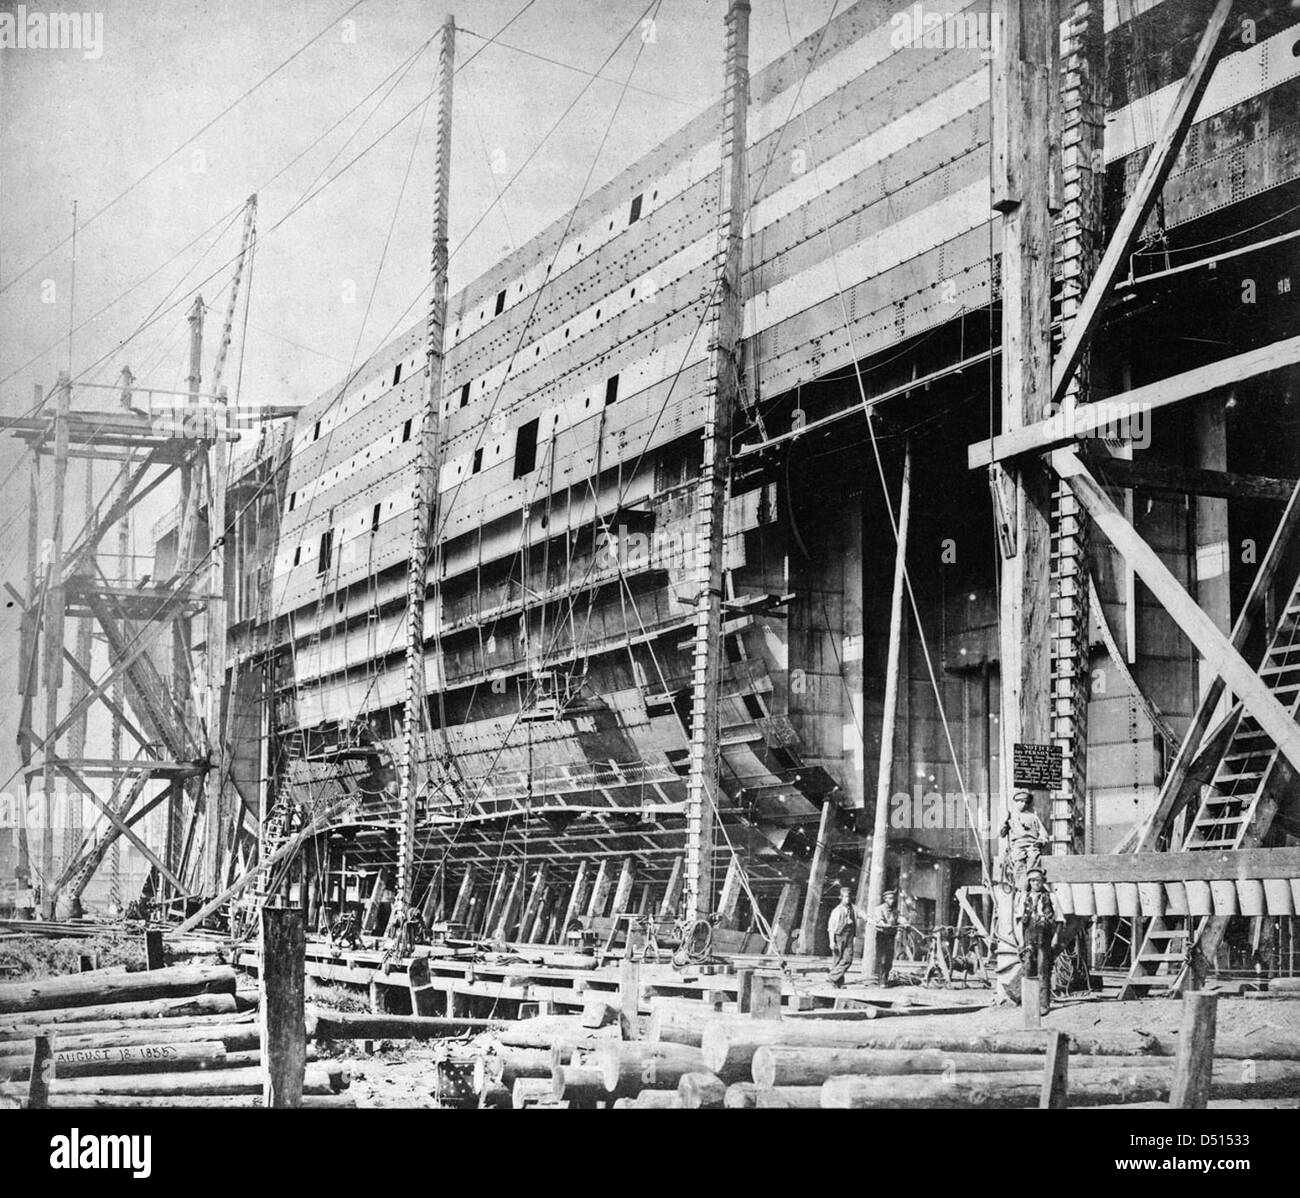 The 'Great Eastern' under construction at Millwall Stock Photo